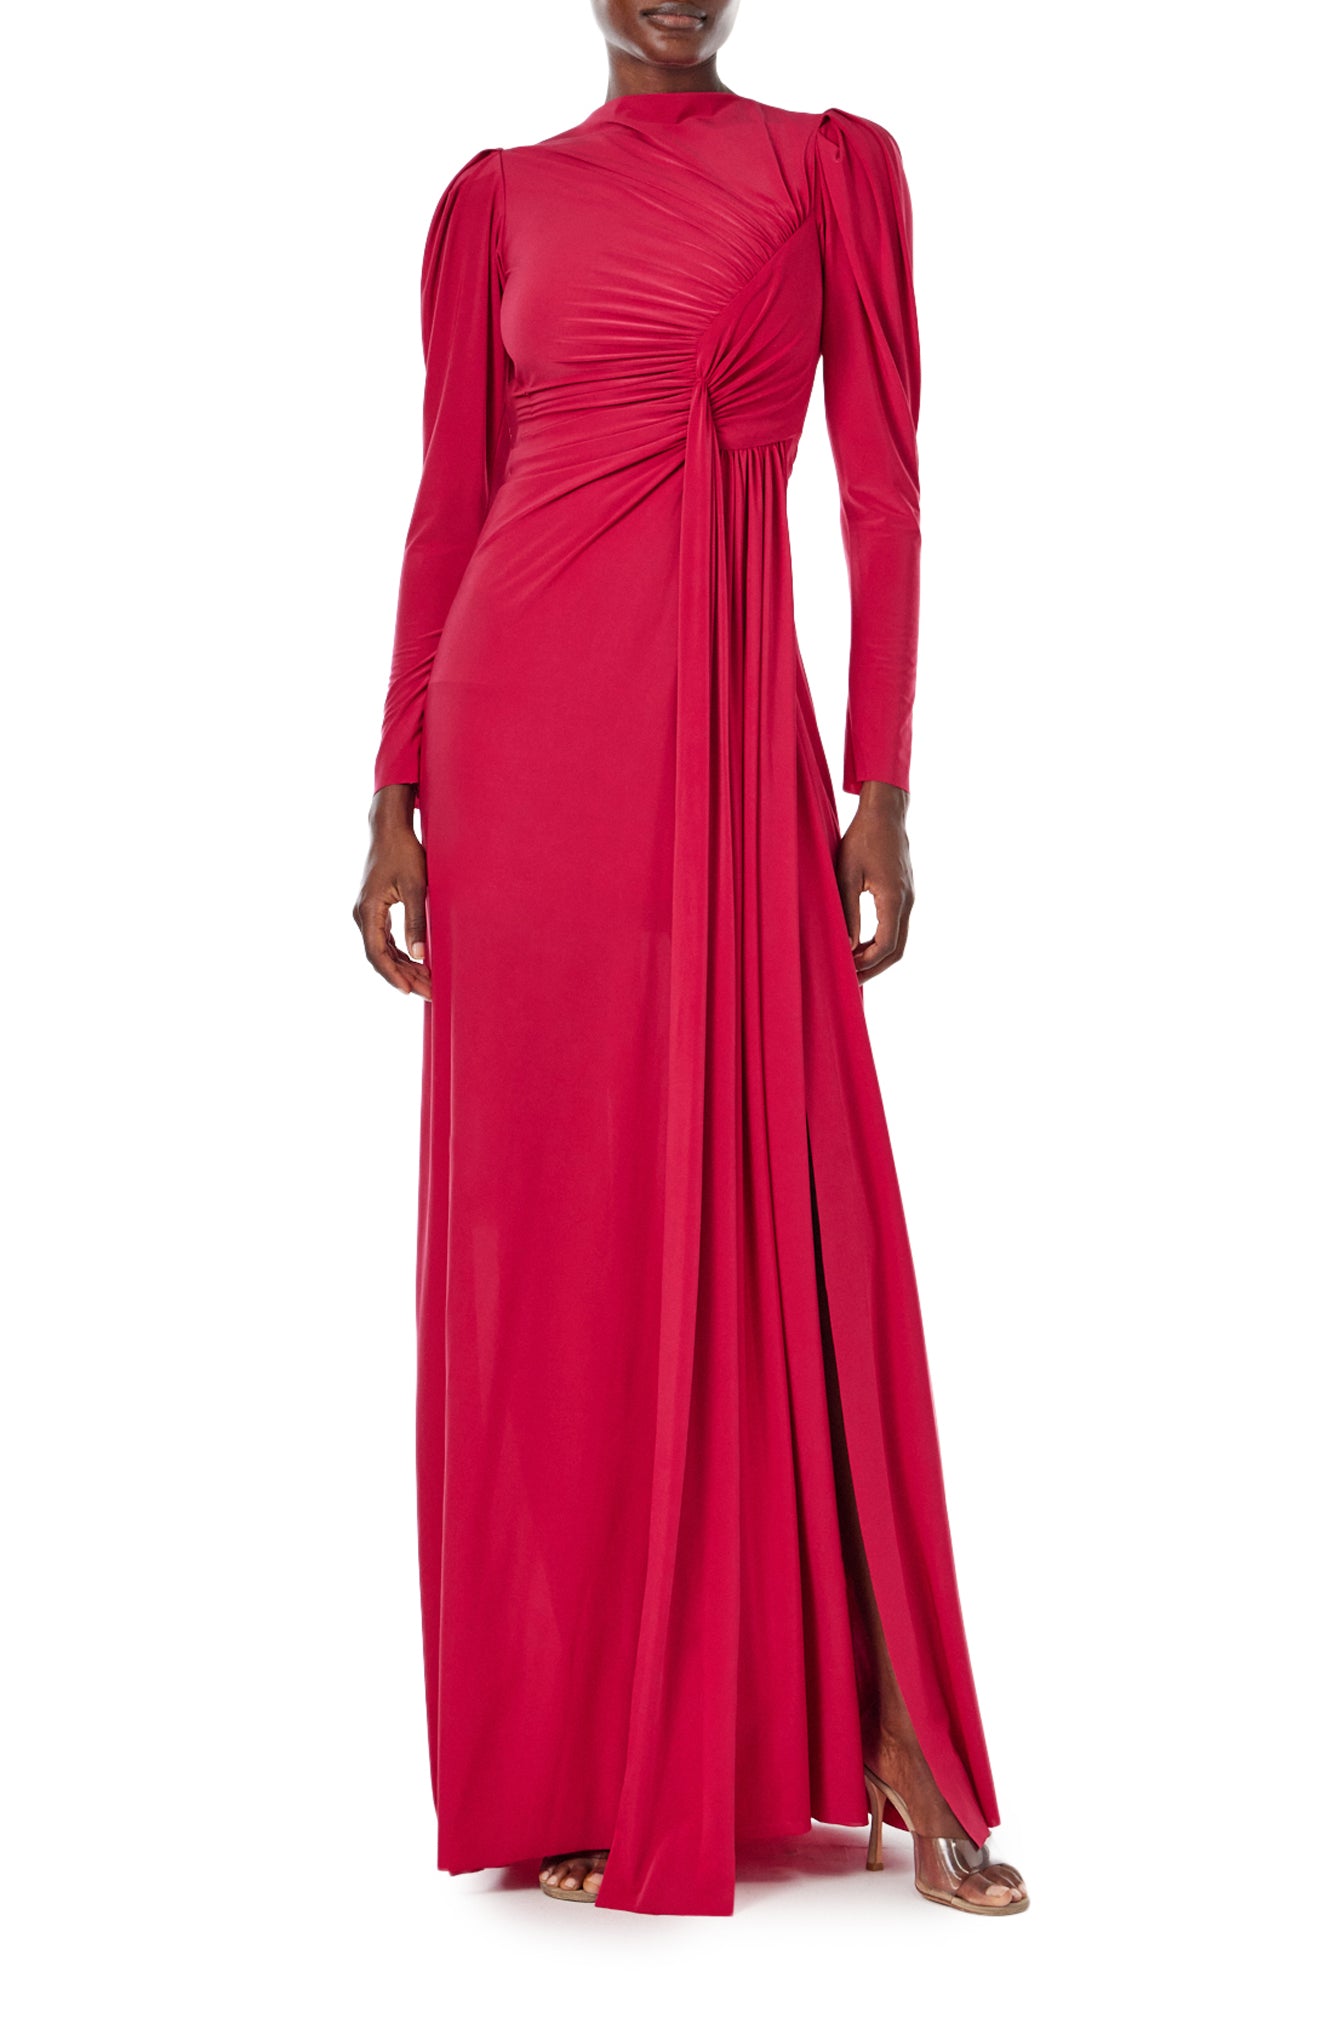 Monique Lhuillier Spring 2024 scarlet red matte jersey long sleeve, gown with draped bodice, jewel neckline and high front skirt slit - front two.